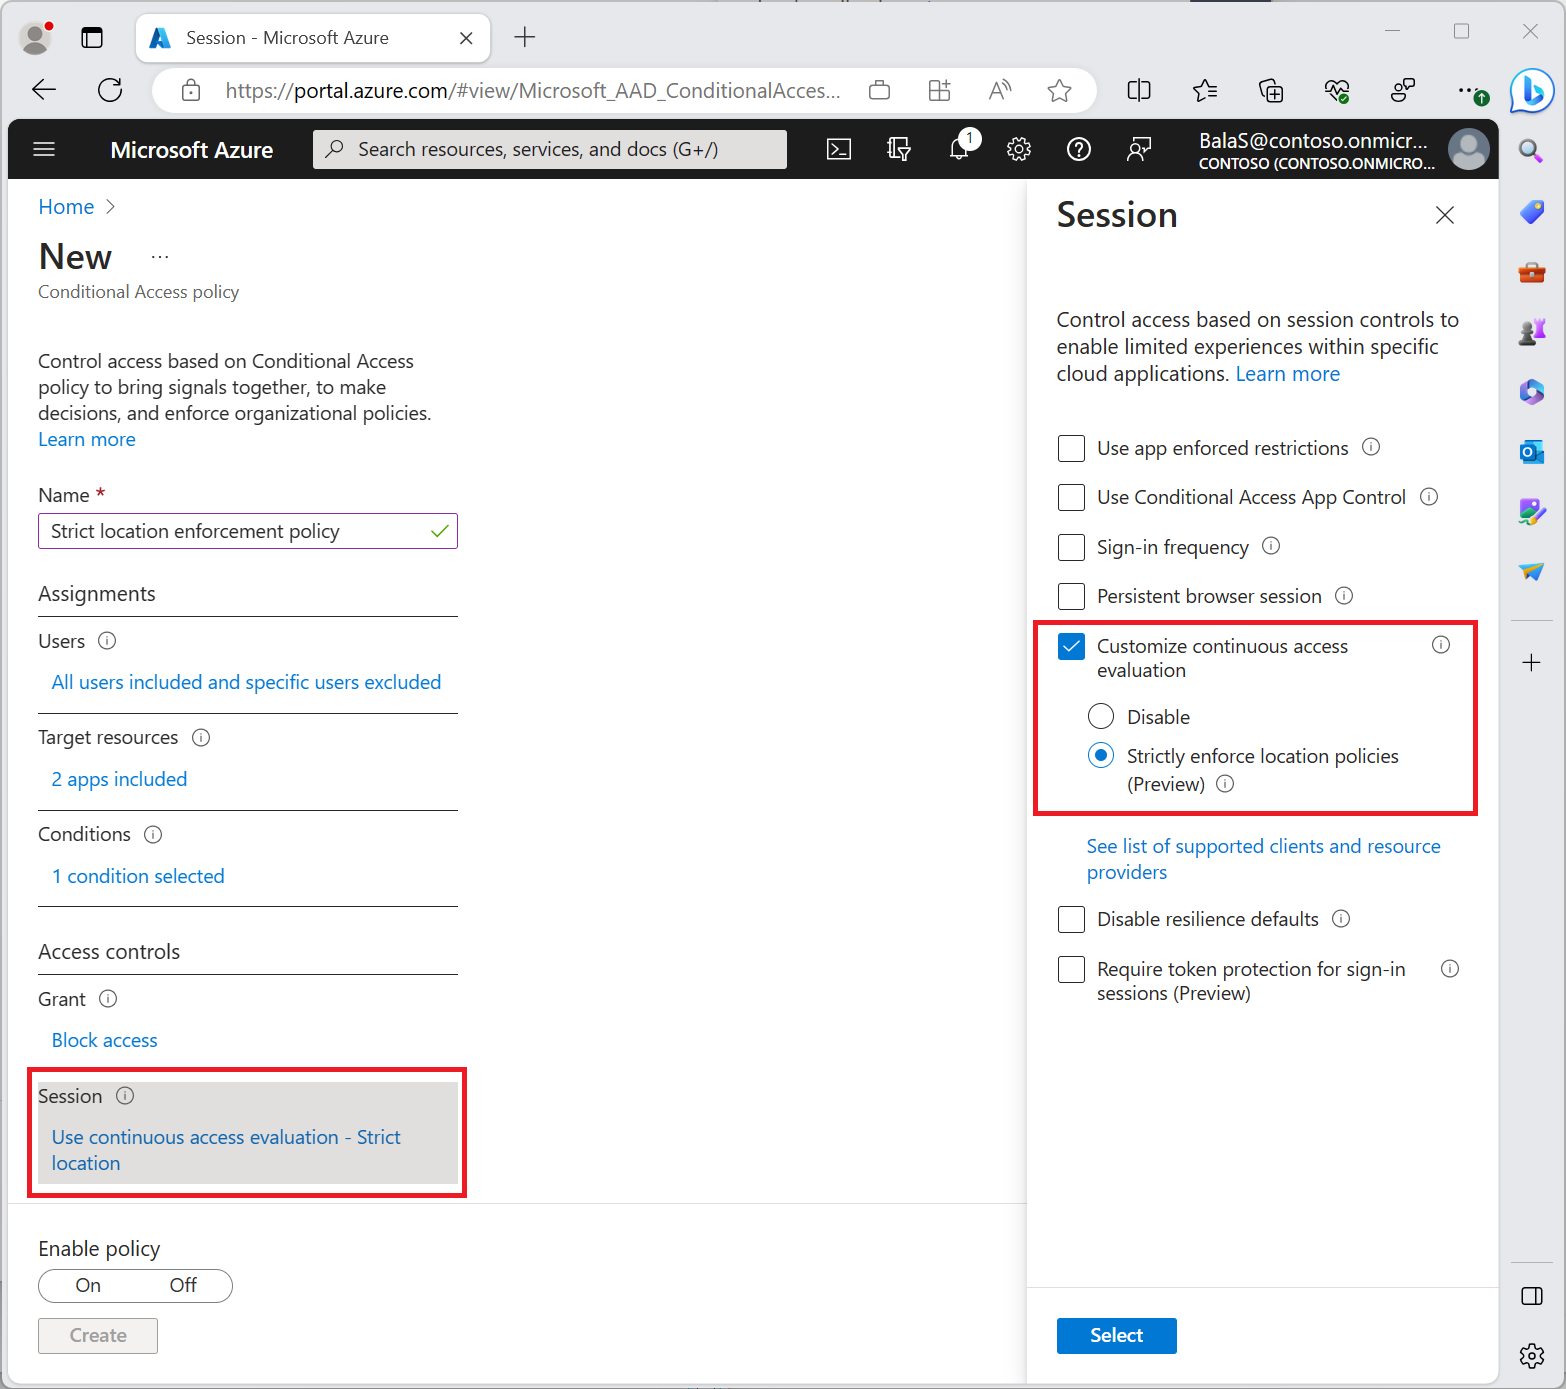 Screenshot showing a Conditional Access policy with "Strictly enforce location policies" enabled.